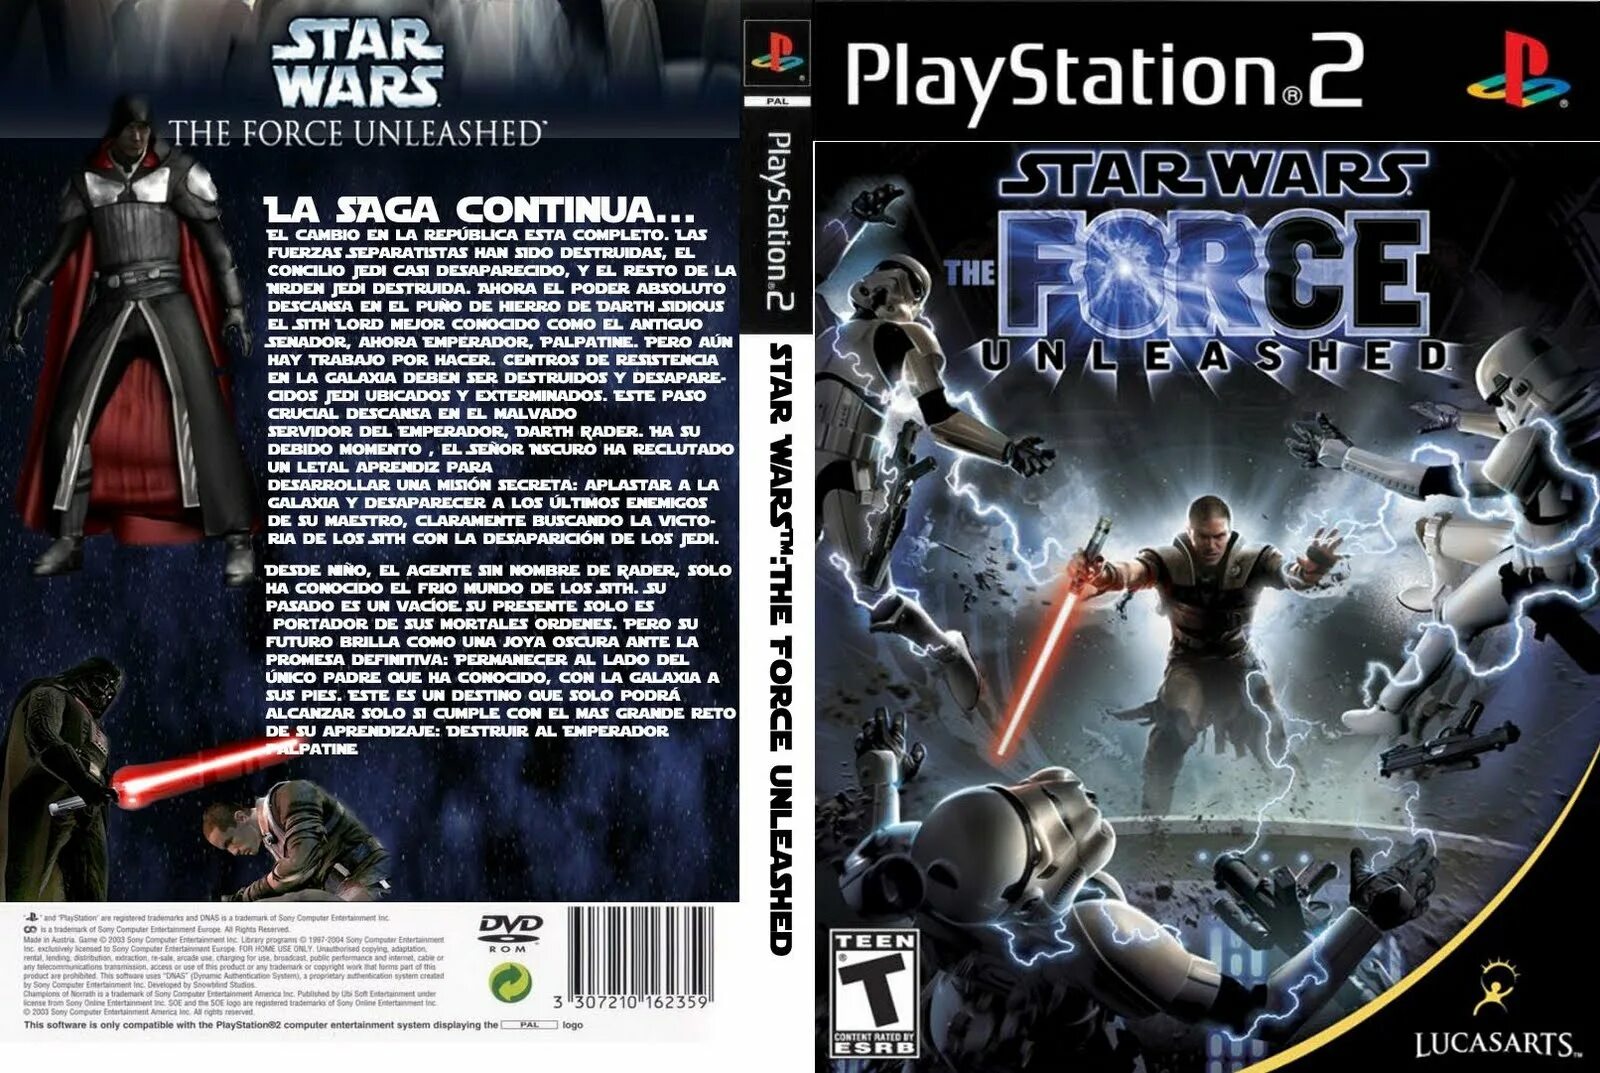 Star wars the force unleashed коды. Диск ps3 Star Wars the Force unleashed. The Force unleashed ps2. PLAYSTATION 2 the Force unleashed. Star Wars unleashed 2 диск ps2.